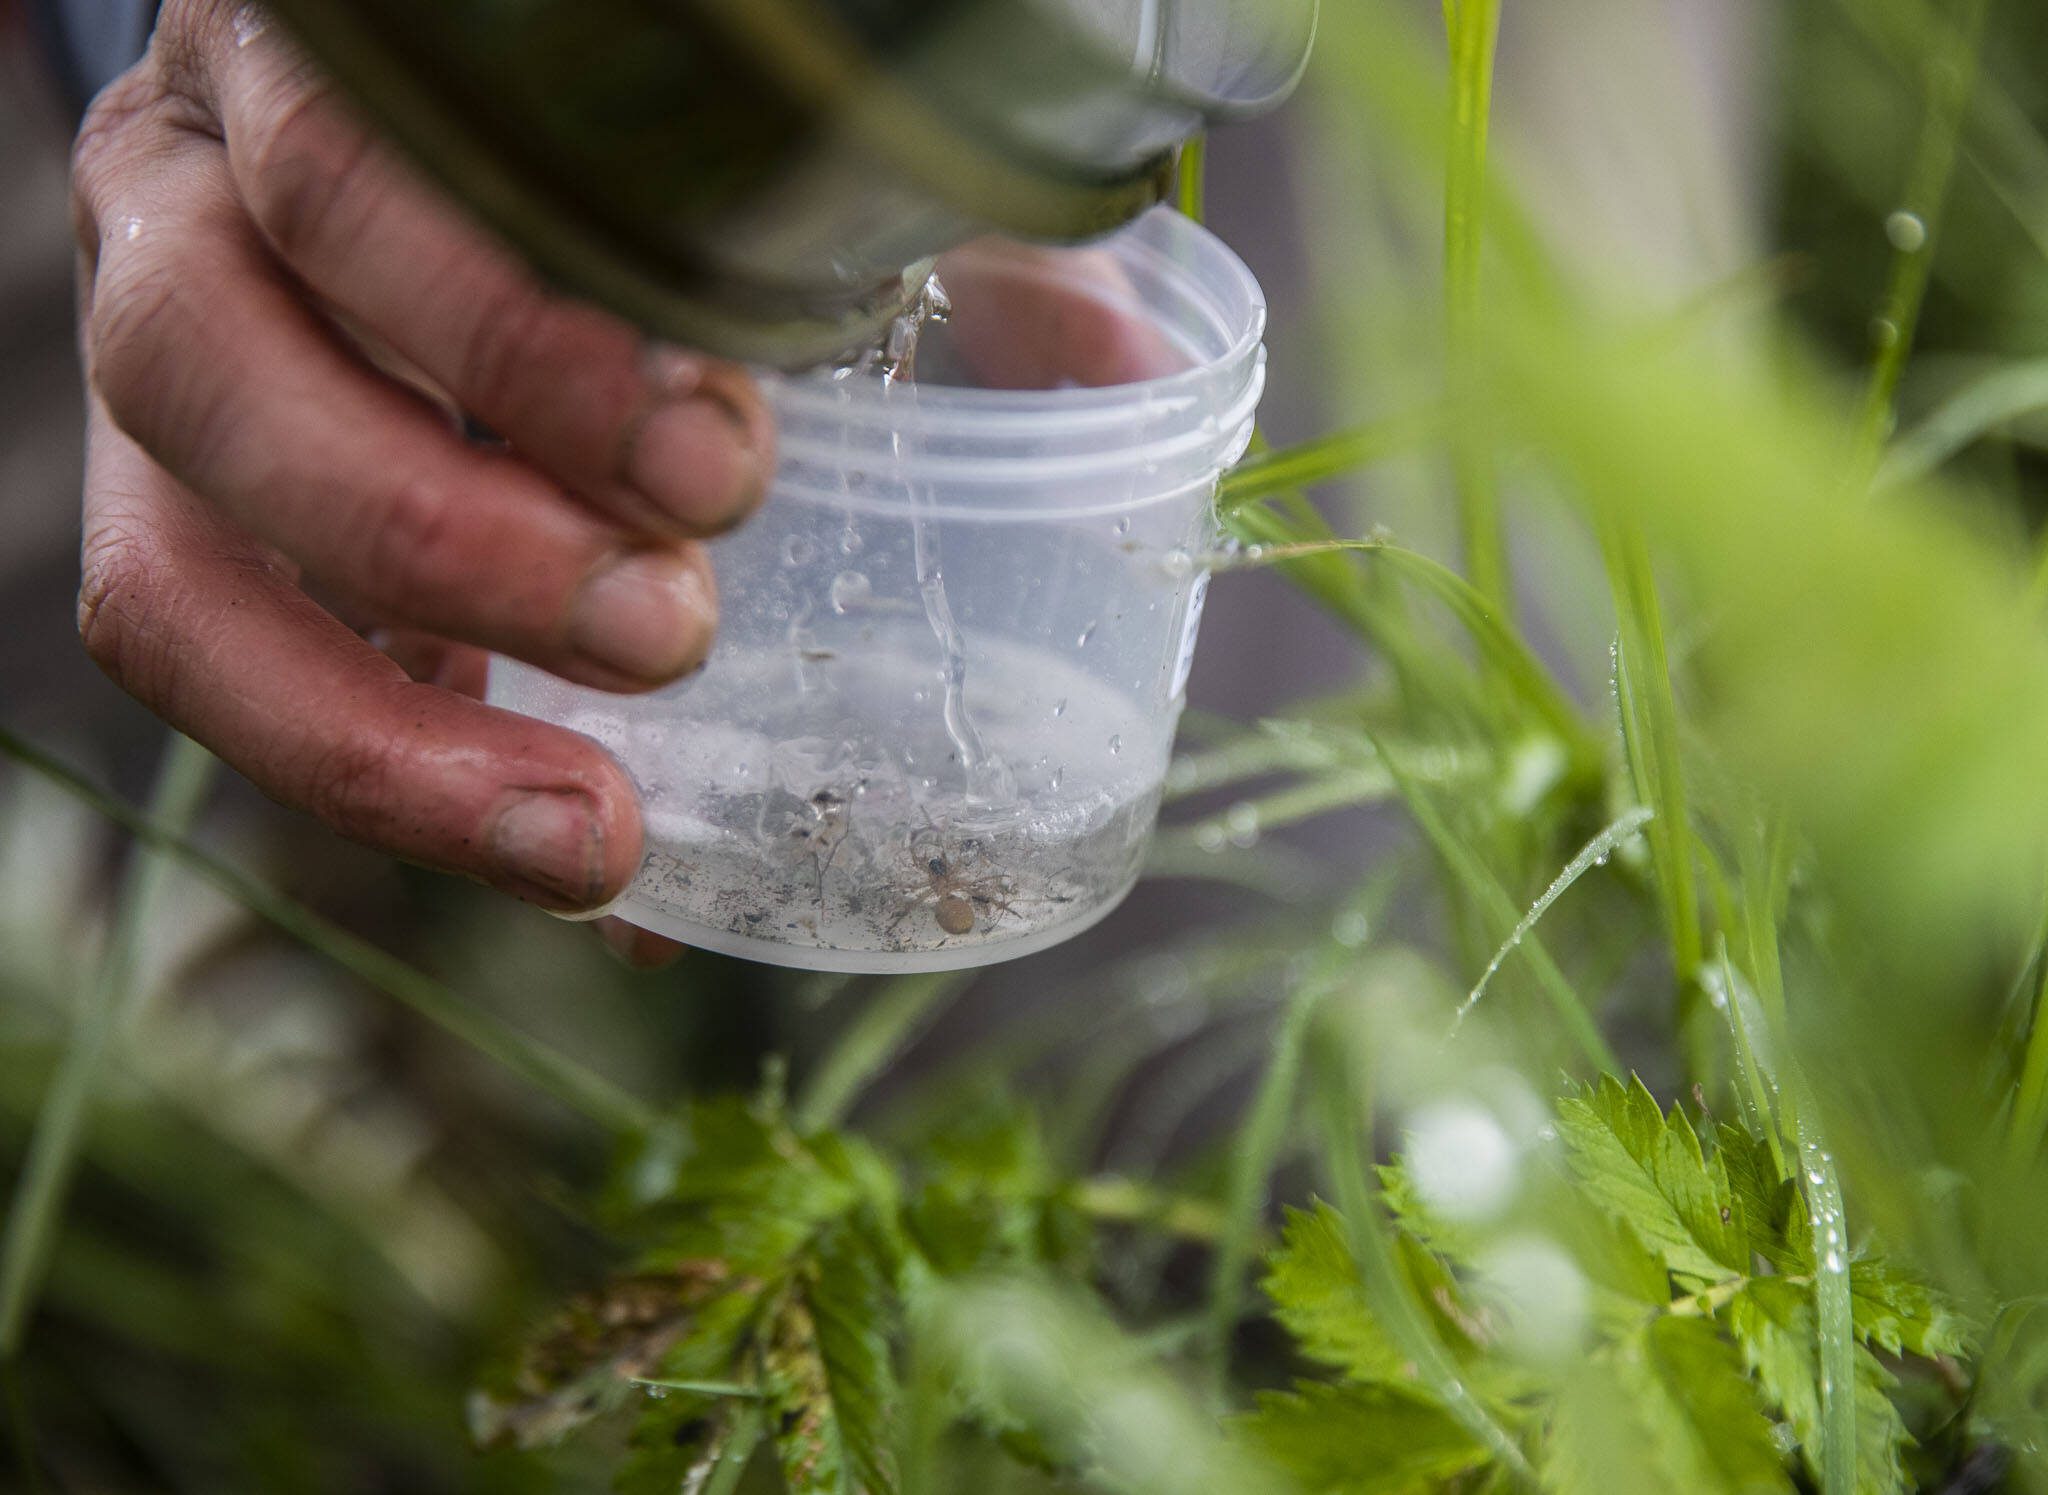 Emily Howe pours a spider caught in a bug trap into a specimen jar on Monday, May 22, 2023 in Stanwood, Washington. (Olivia Vanni / The Herald)